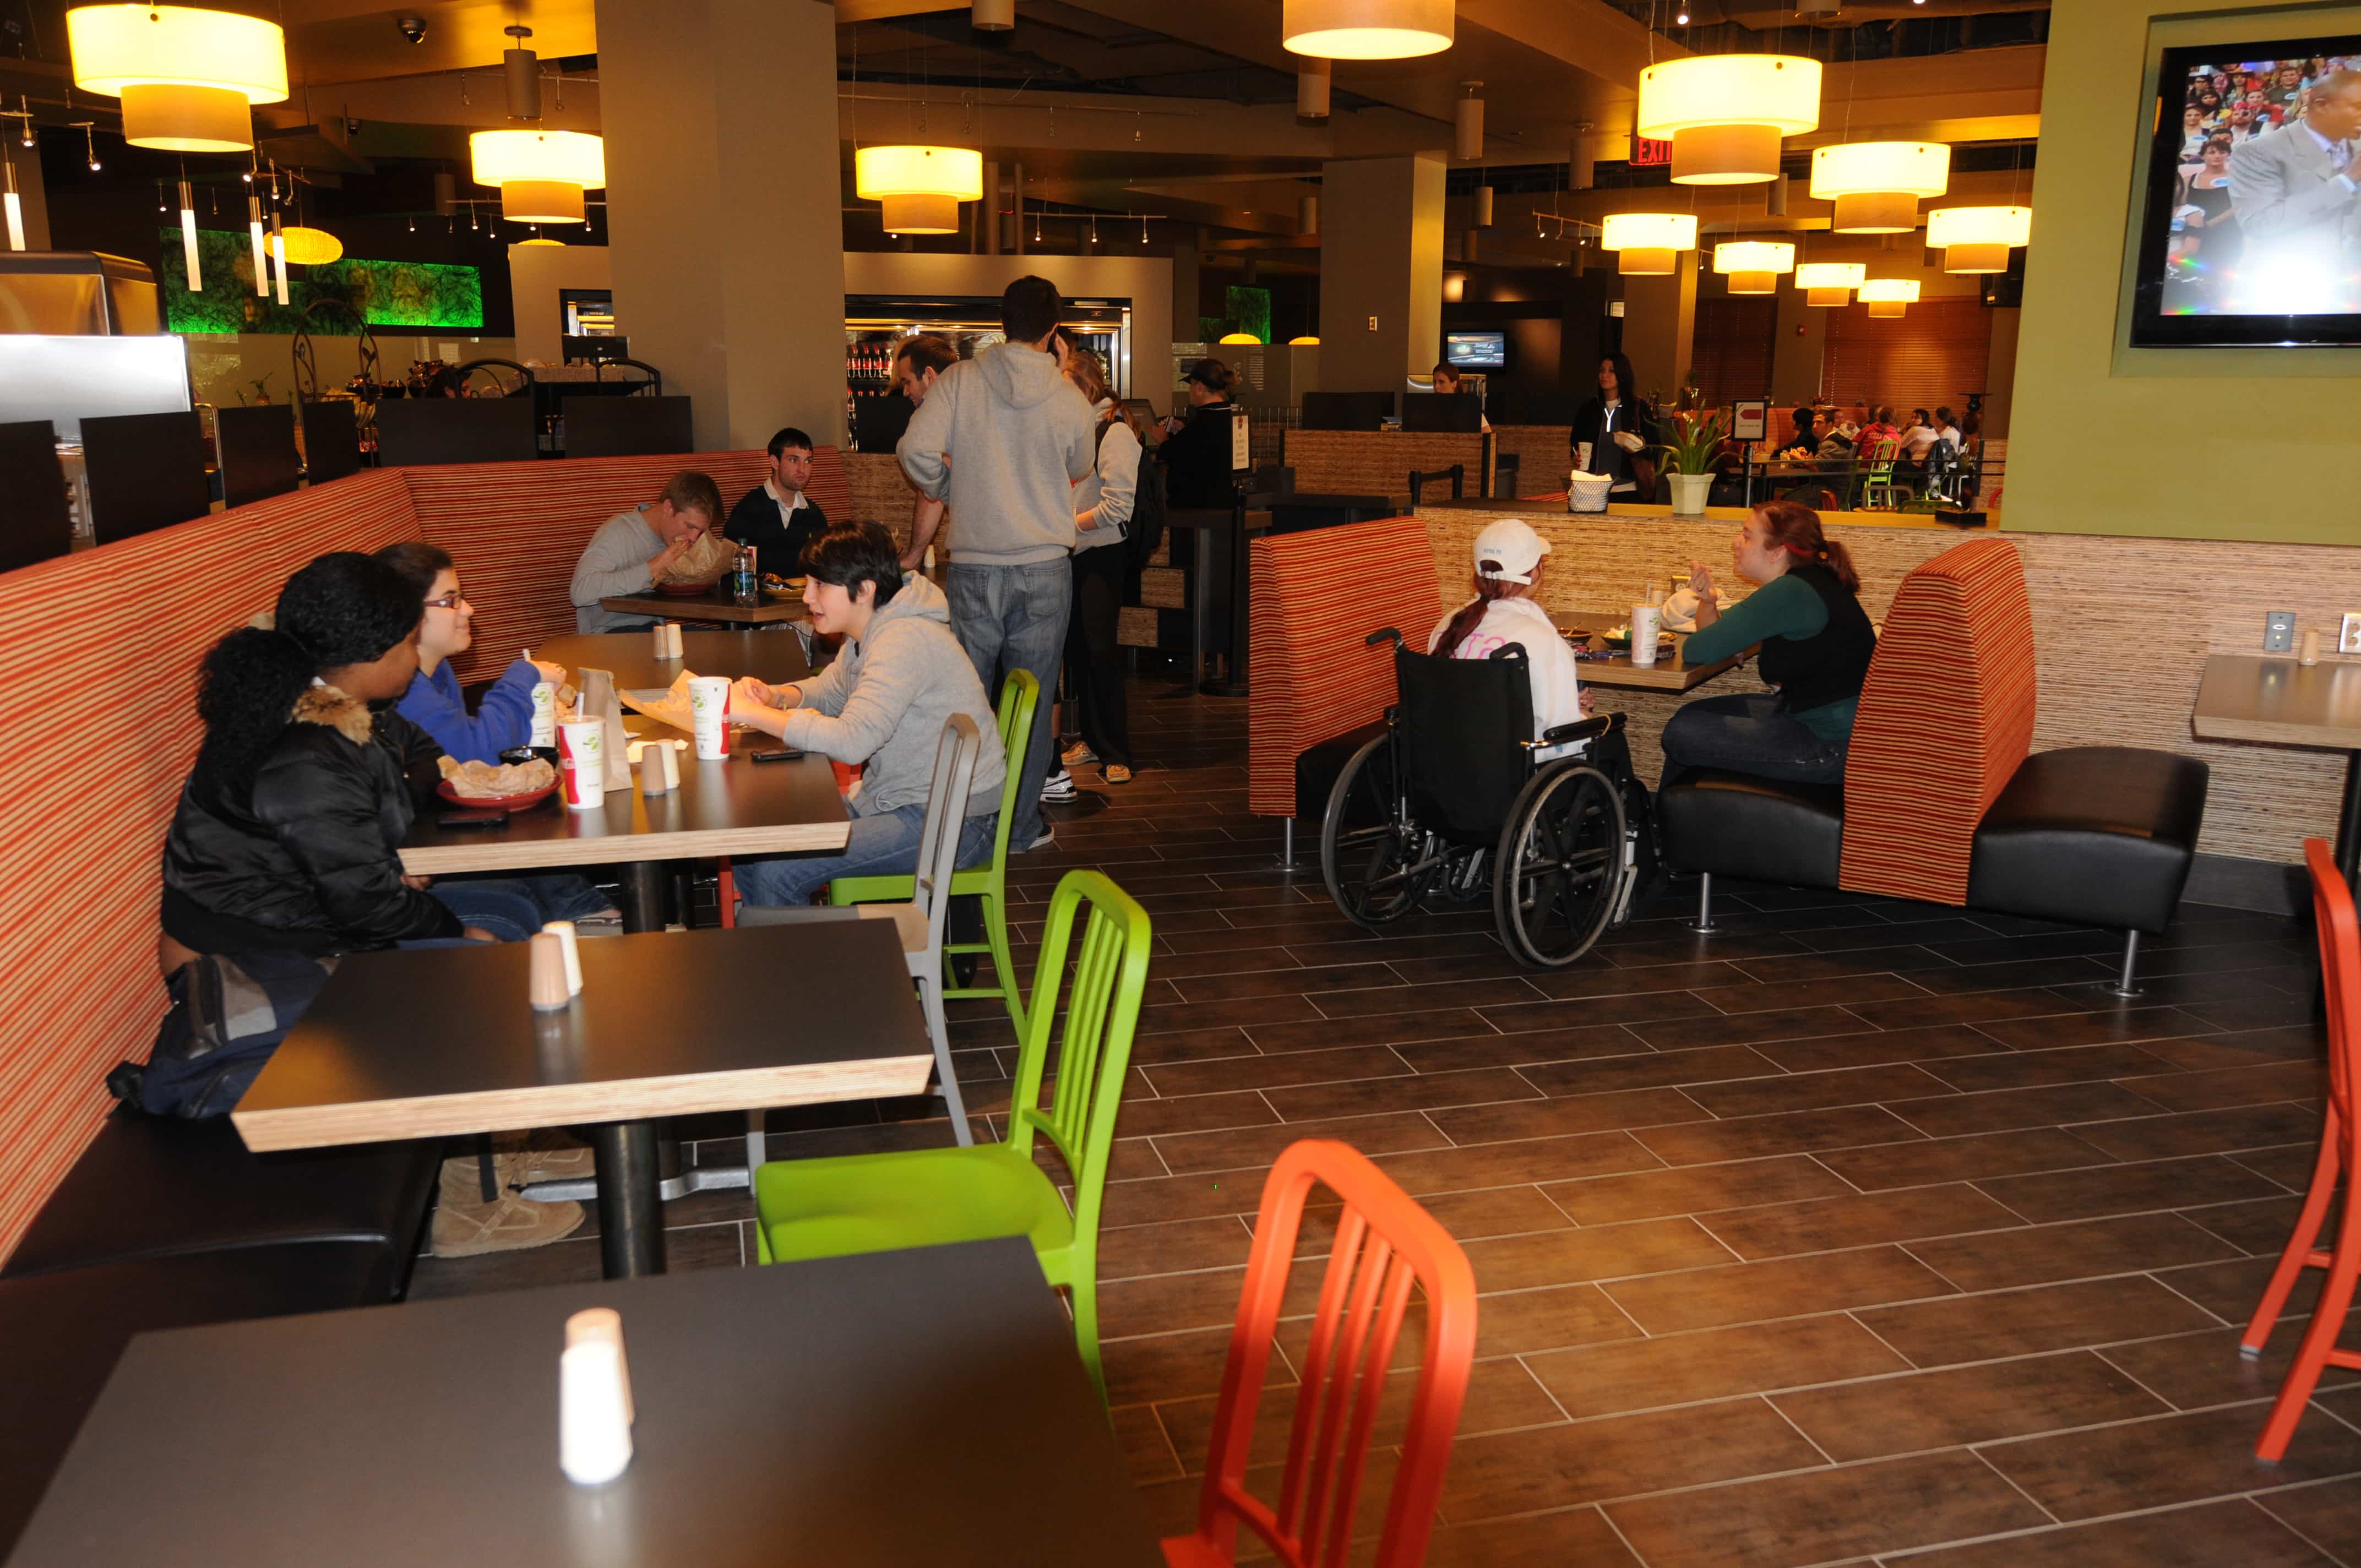 The Grainary has a large seating area with booths, tables and chairs and TV.